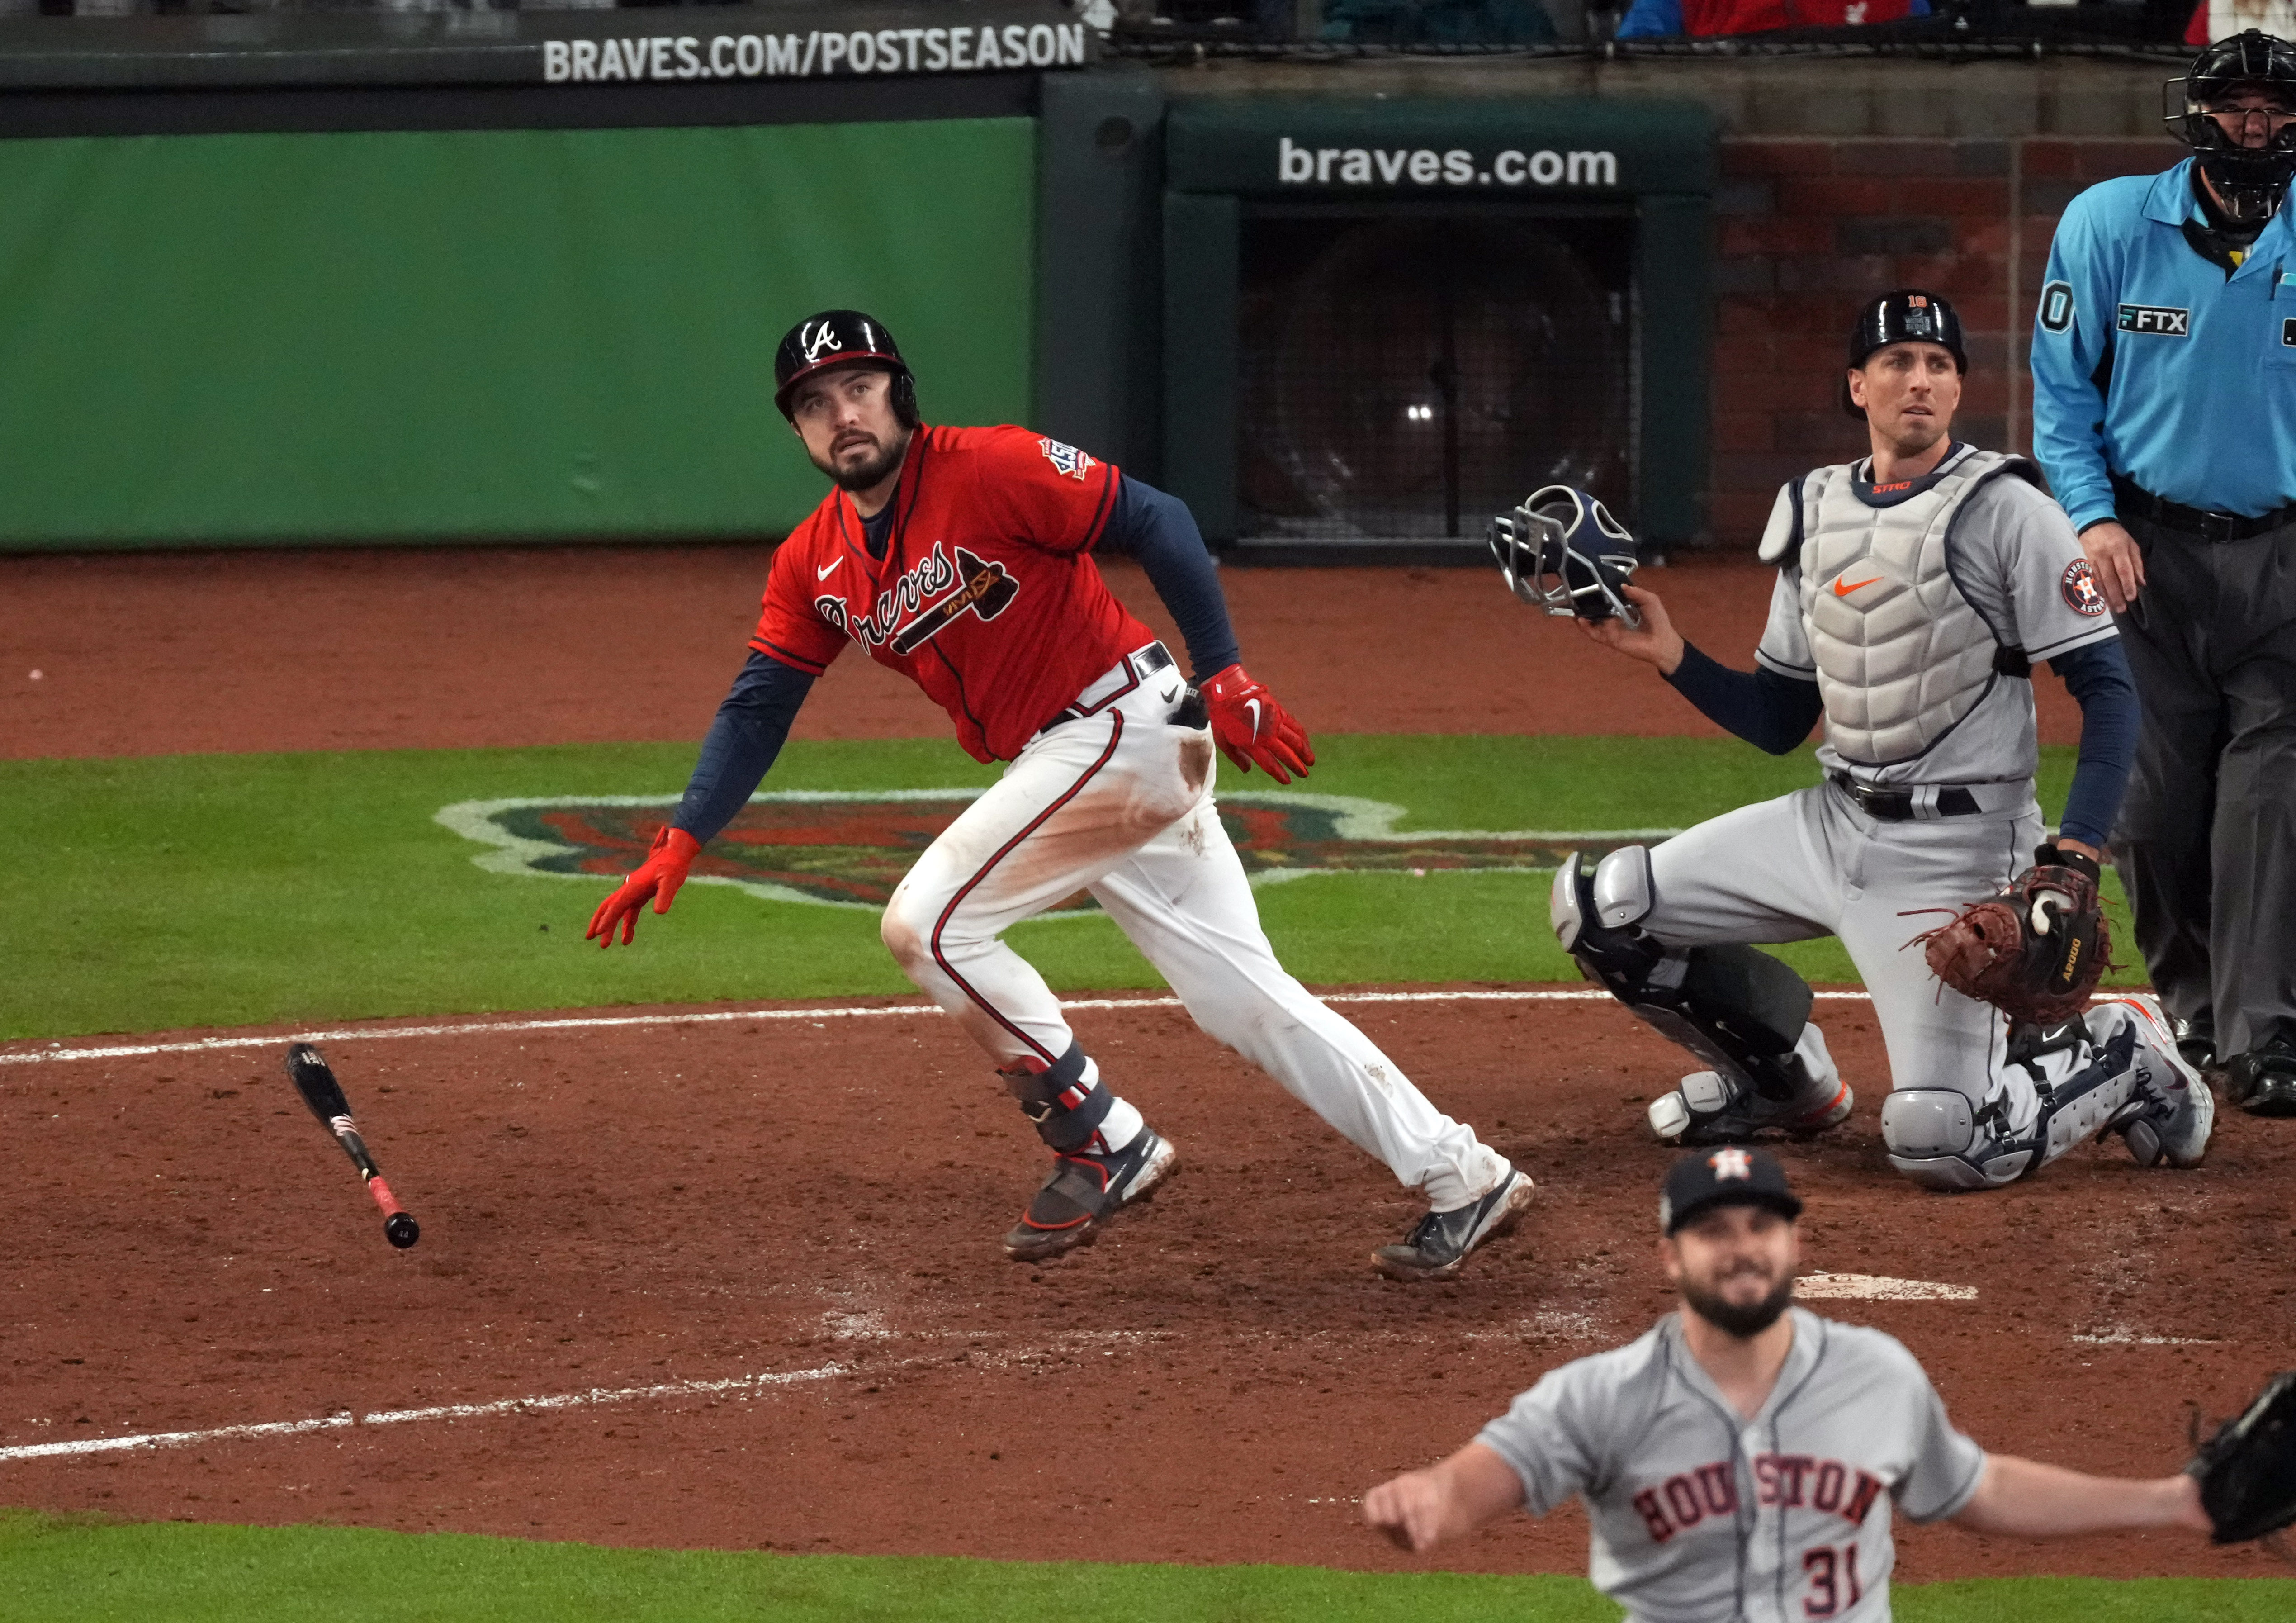 Braves beat Astros 2-0 in Game 3 to seize World Series lead